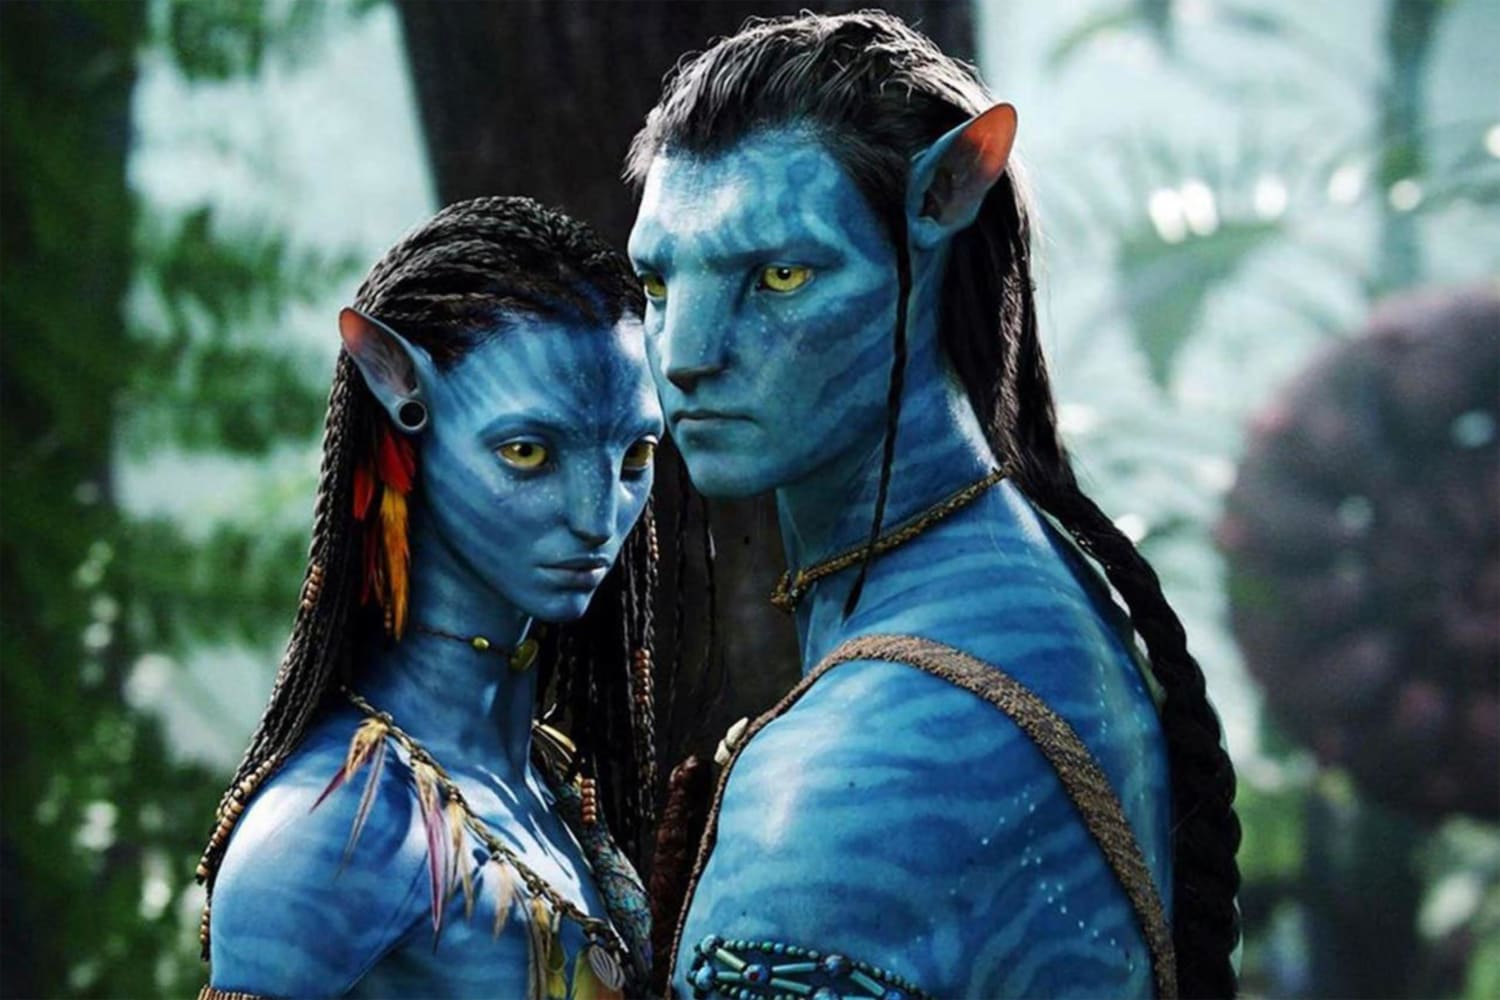 James Cameron directed, wrote, co-produced, and co-edited Avatar, a 2009 epic science fiction film starring Sam Worthington, Zoe Saldana, Stephen Lang, Michelle Rodriguez,[6] and Sigourney Weaver.